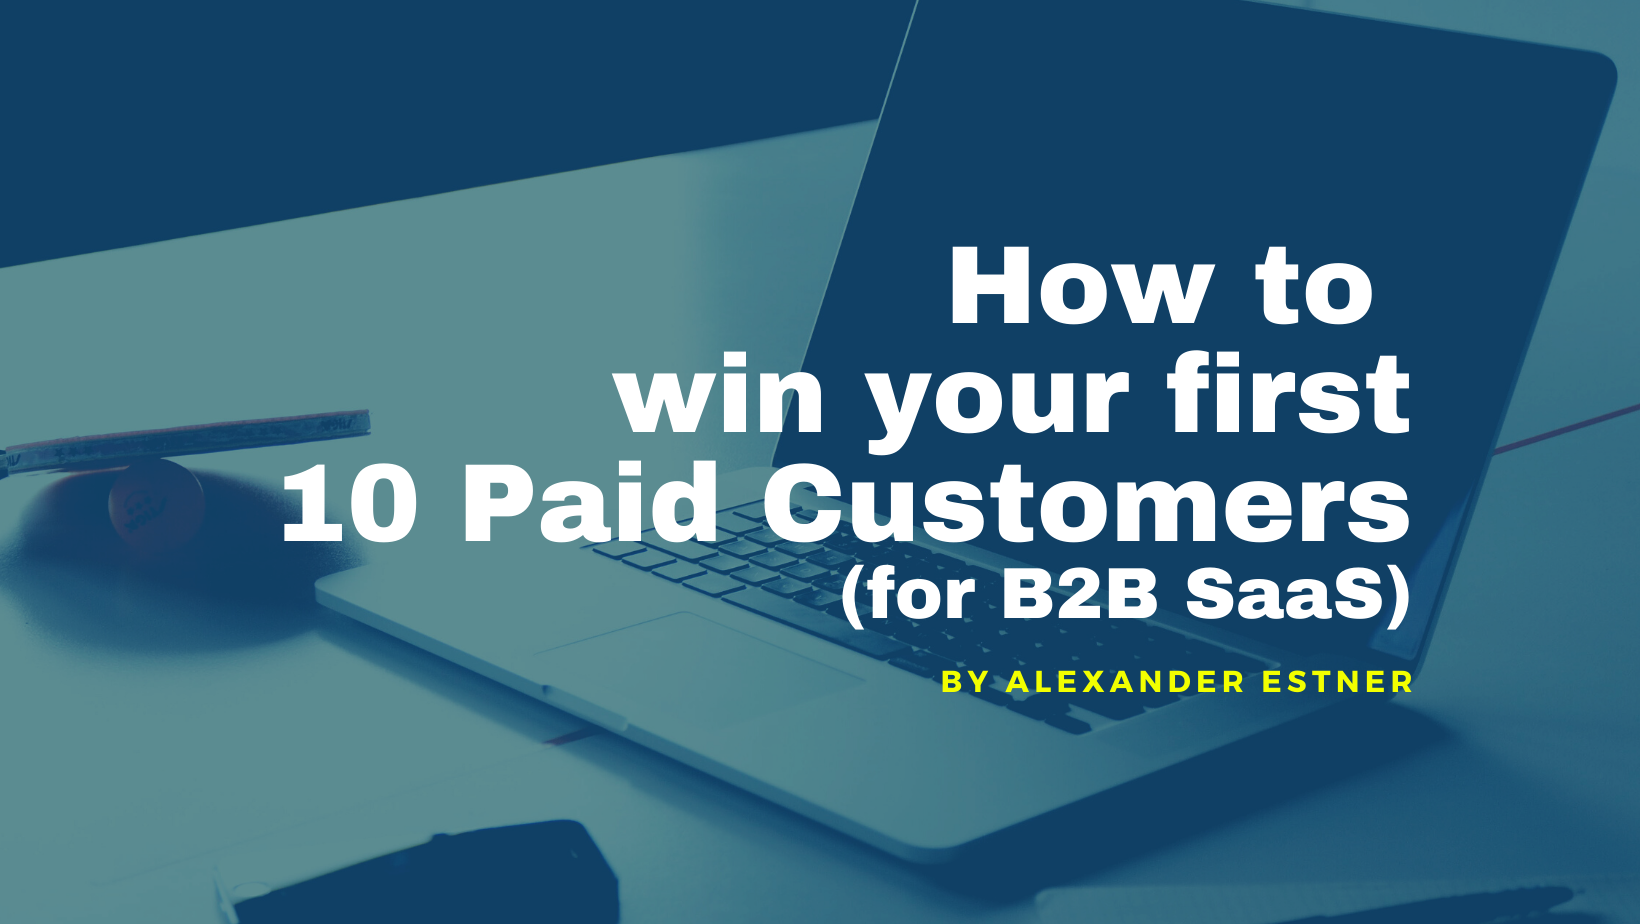 8 Tips: How to get your first 10 paid customers (B2B)